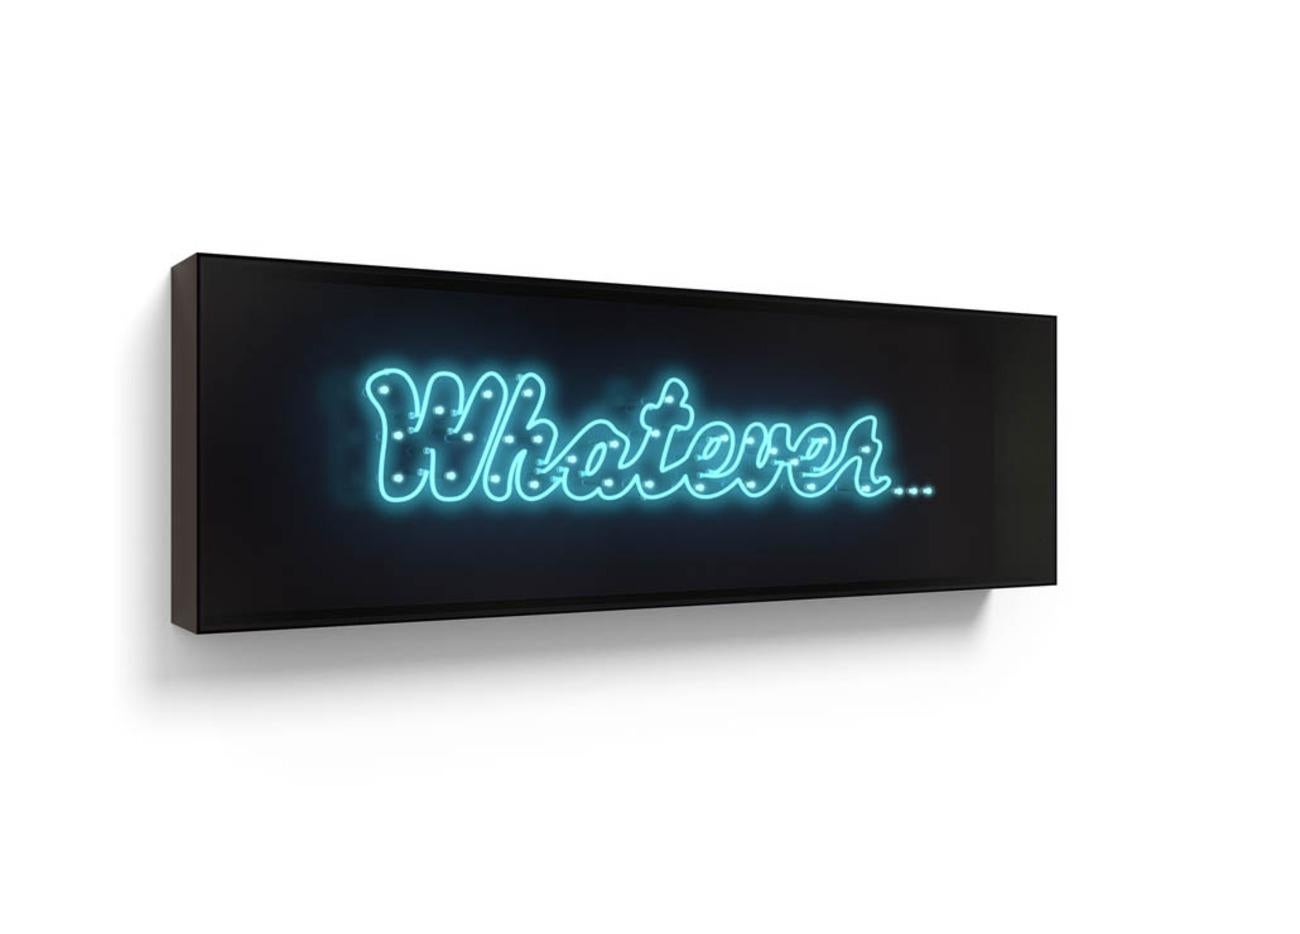 Series: Neon
18.5" x 57.5" x 6" - Edition of 9

Disarmingly blunt and intensely intimate, David Drebin's neon light installations illuminate hidden aspirations and secret thoughts of the femmes fatales who inhabit the elusive world of his iconic